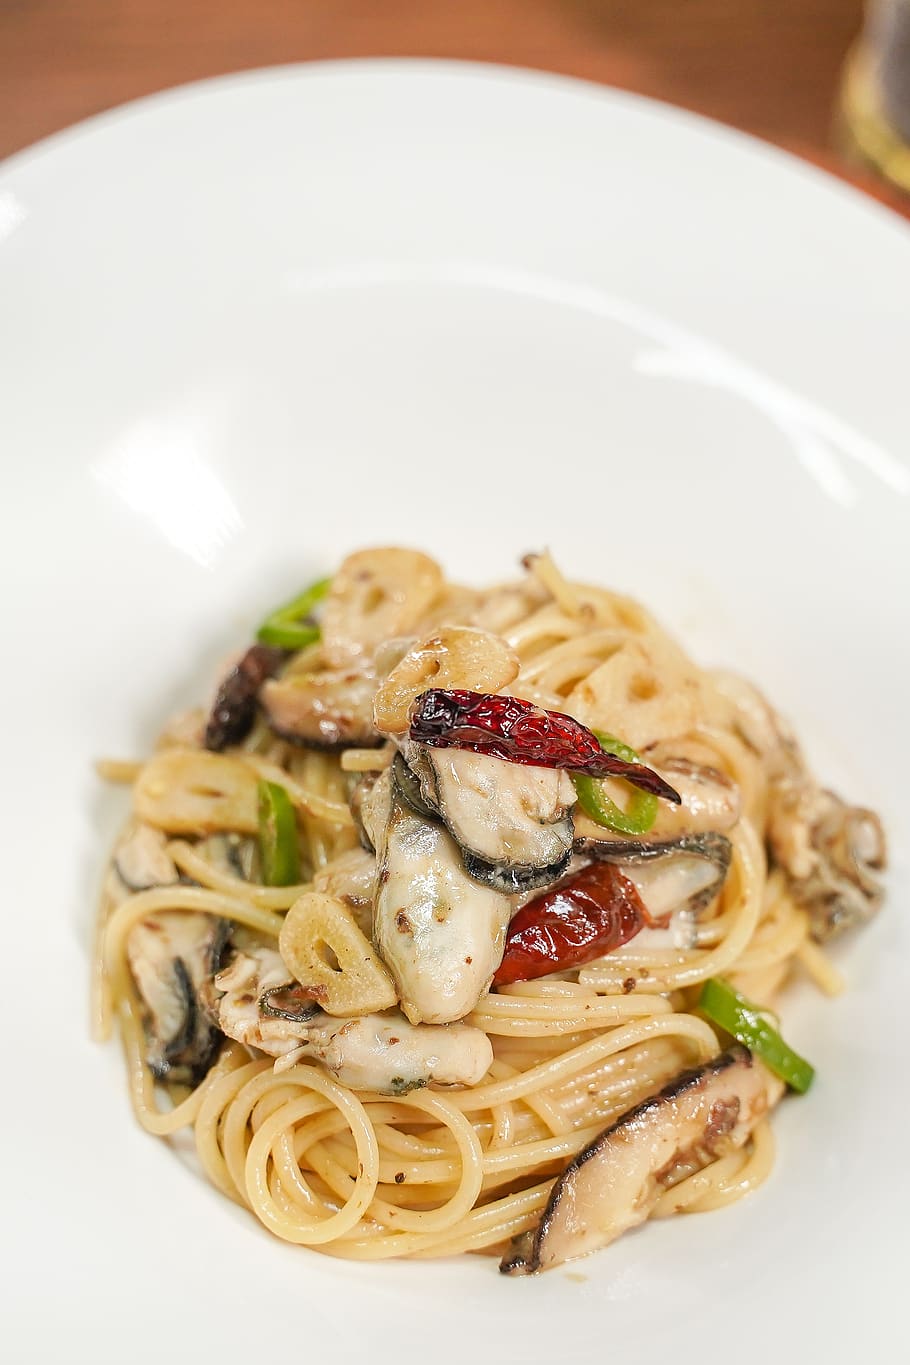 oyster, pasta, anchovies, anchovy pasta, roll the pasta, anchovies pasta, food and drink, food, healthy eating, freshness